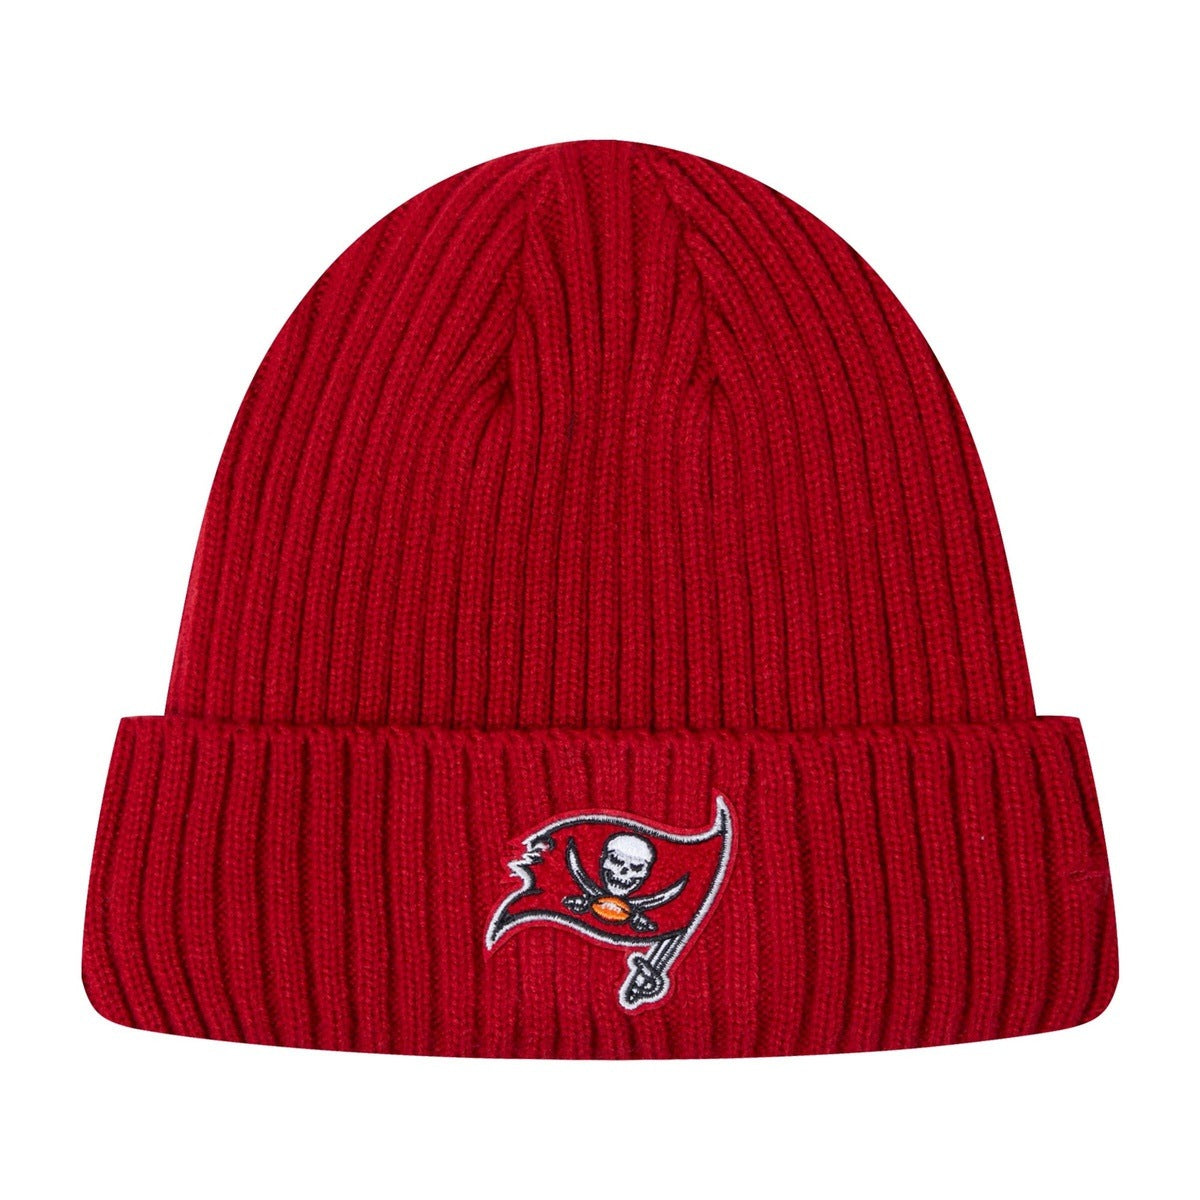 TAMPA BAY BUCCANEERS MASH UP BEANIE (RED)